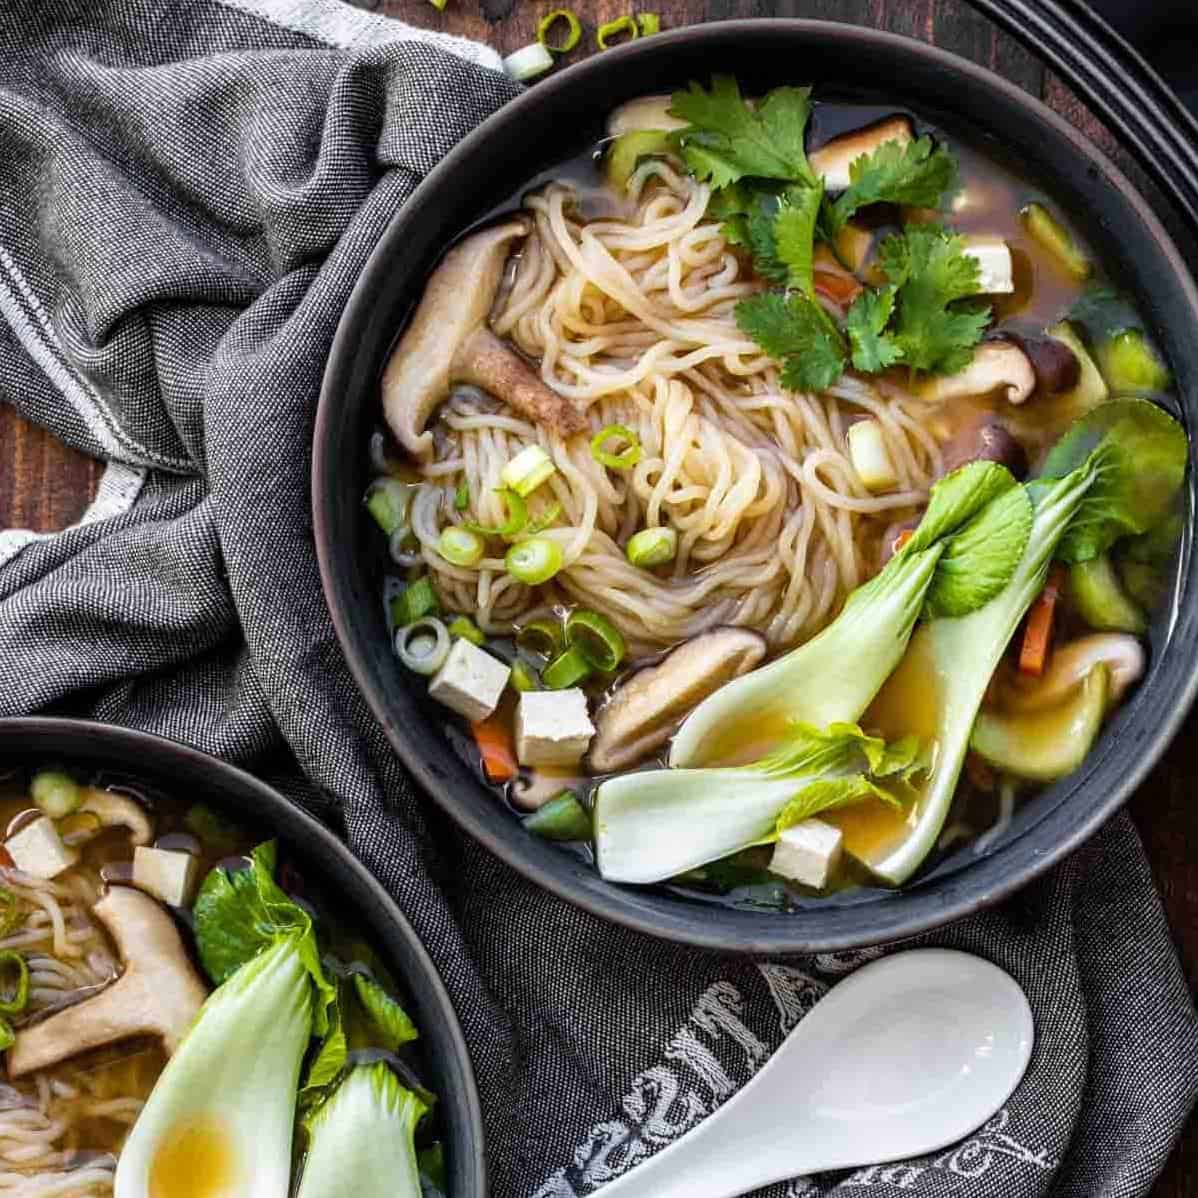  This miso soup recipe is a vegetarian version, meaning it has all the hearty goodness from the meat version, but is 100% plant-based.